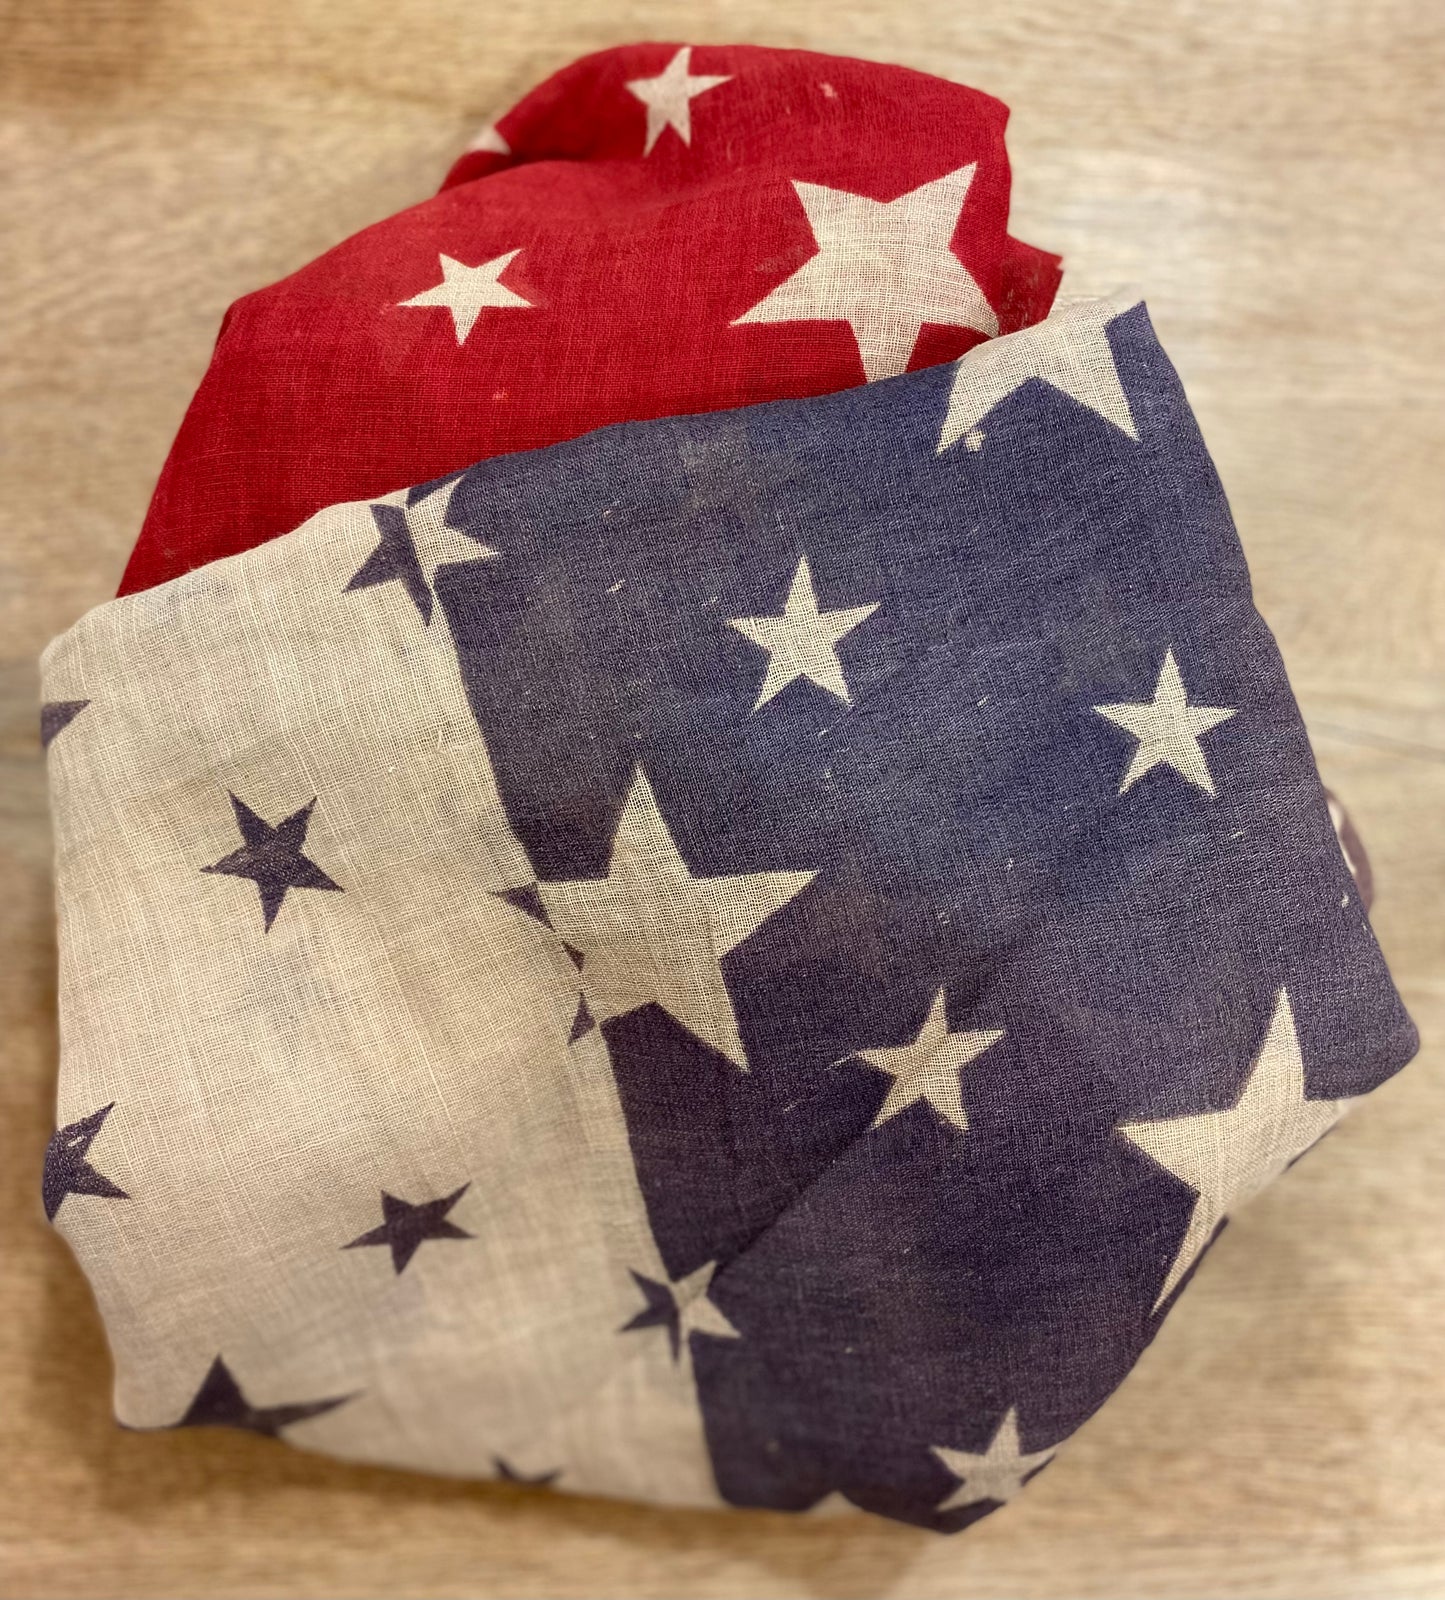 Red, White and Blue Fabric with Stars